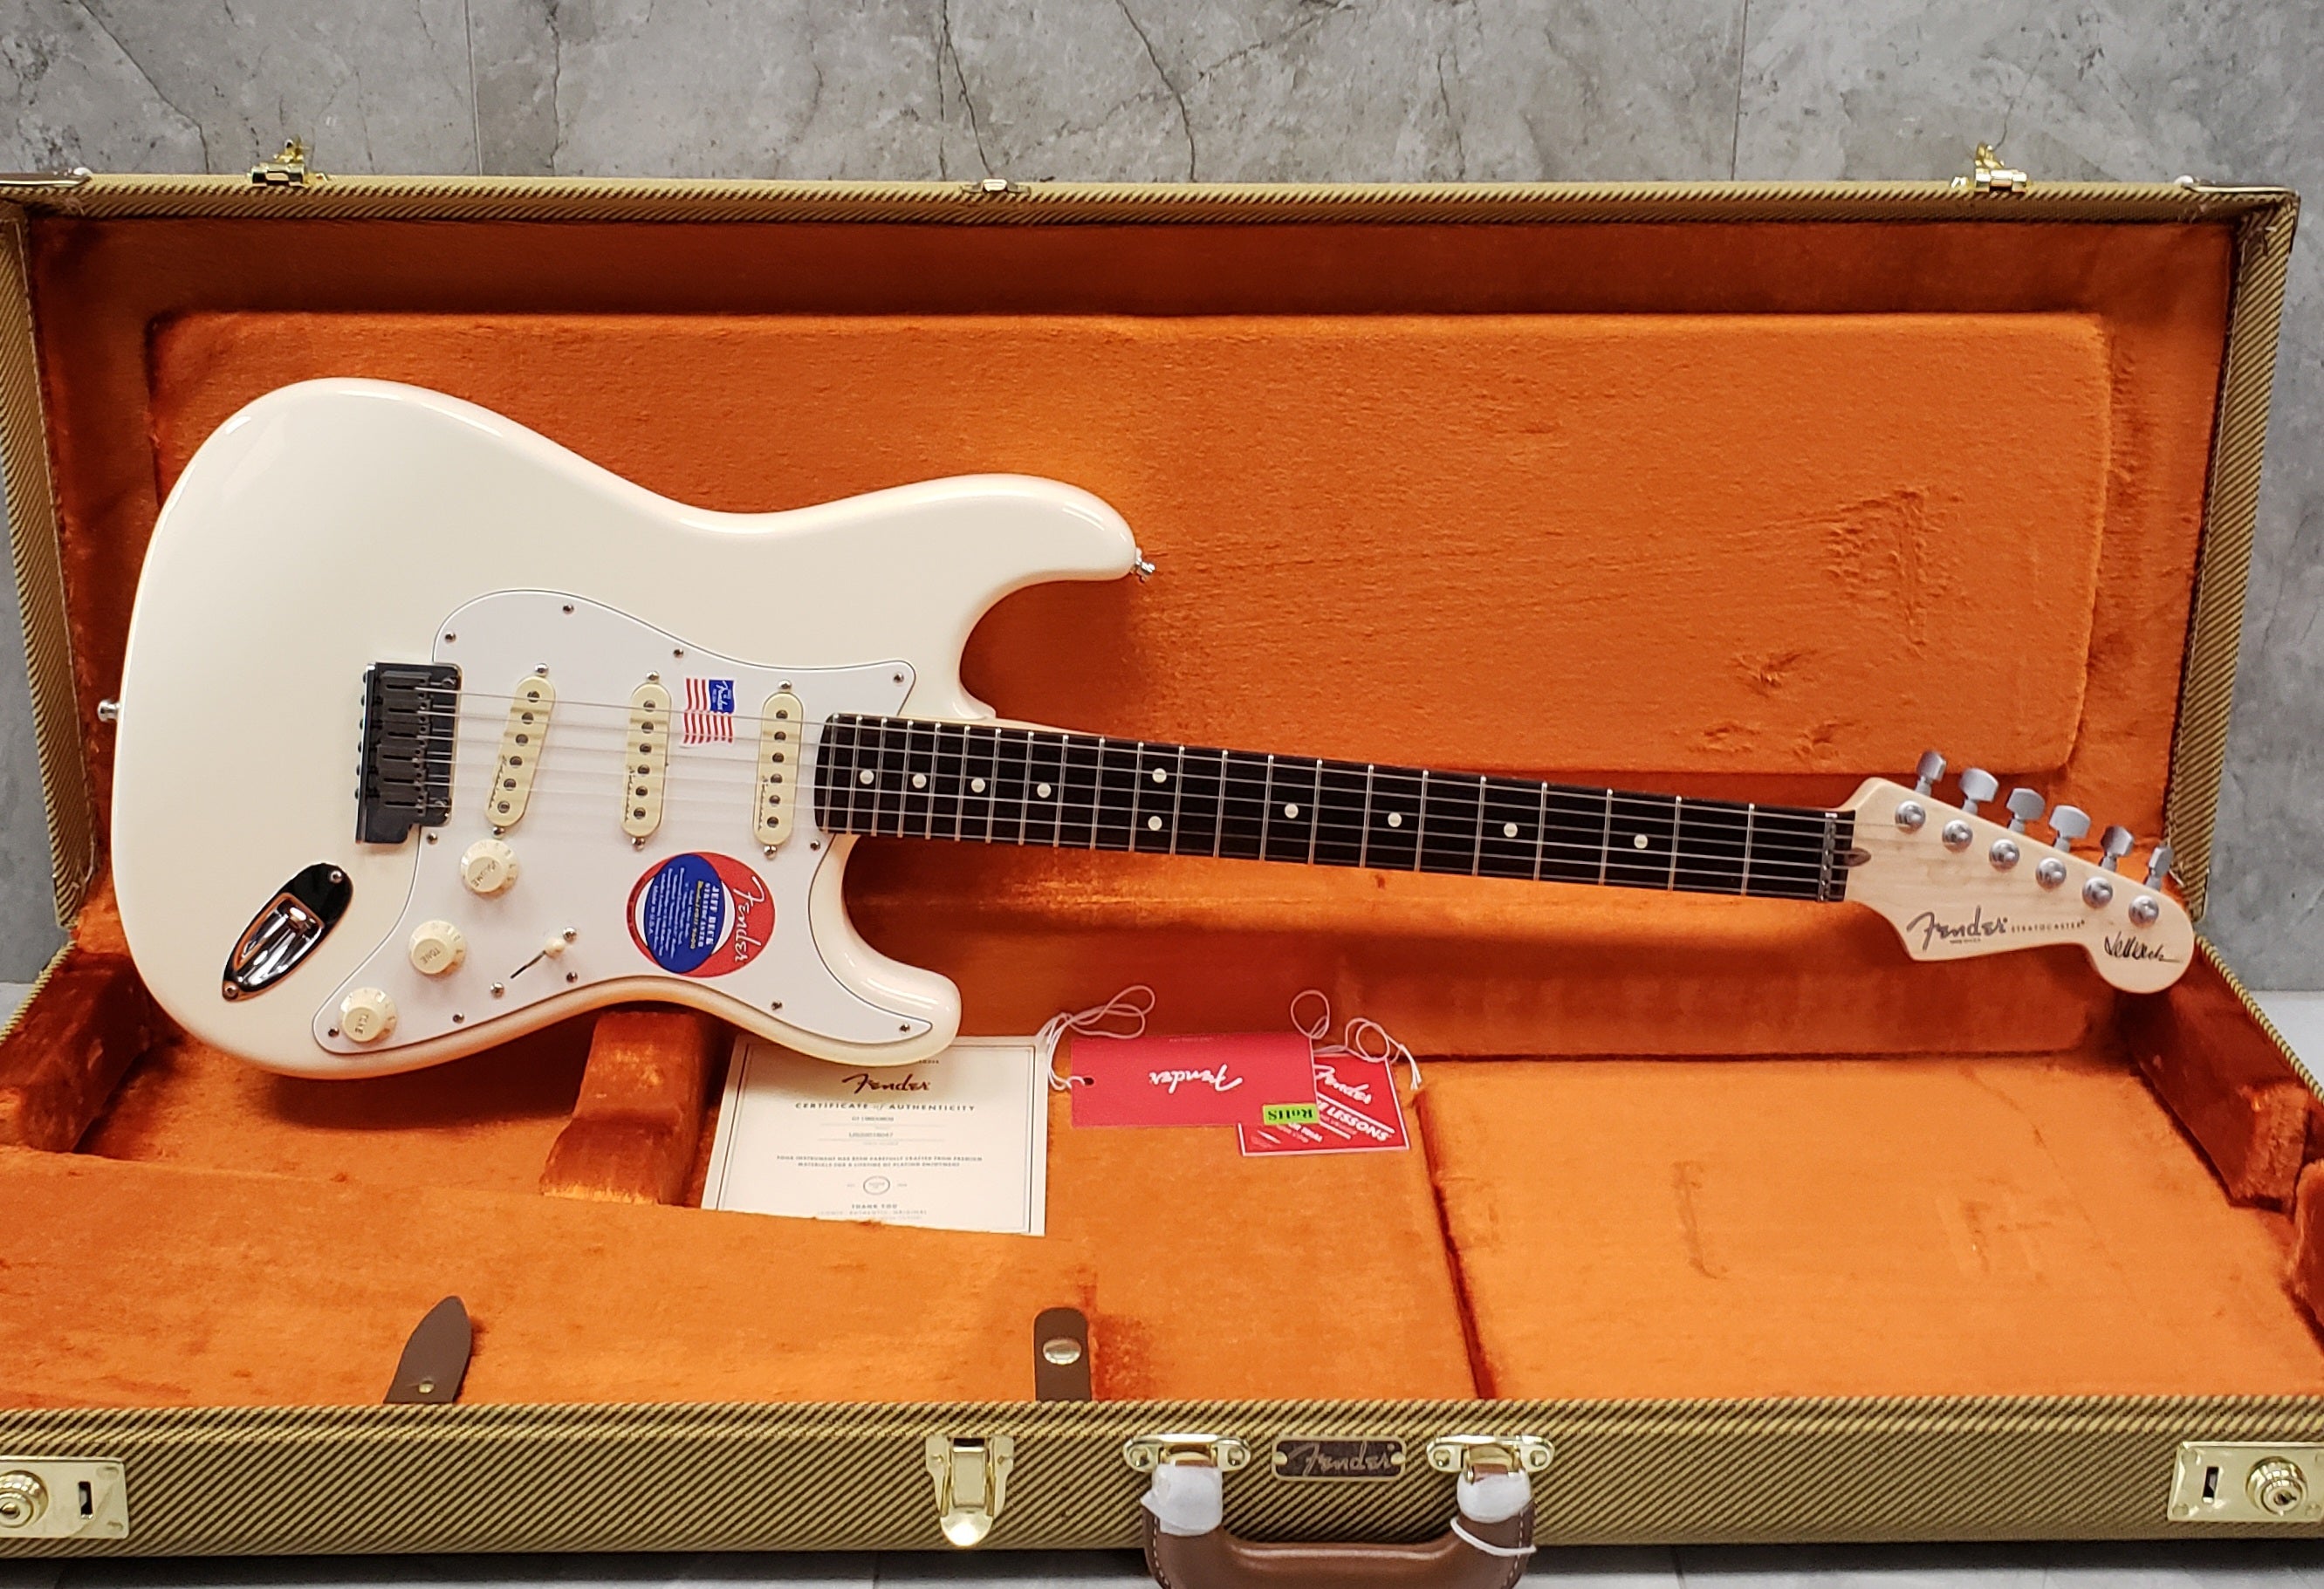 Fender Jeff Beck Stratocaster Rosewood Fingerboard Olympic White 0119600805 SERIAL NUMBER US23046229 - 8.2 LBS